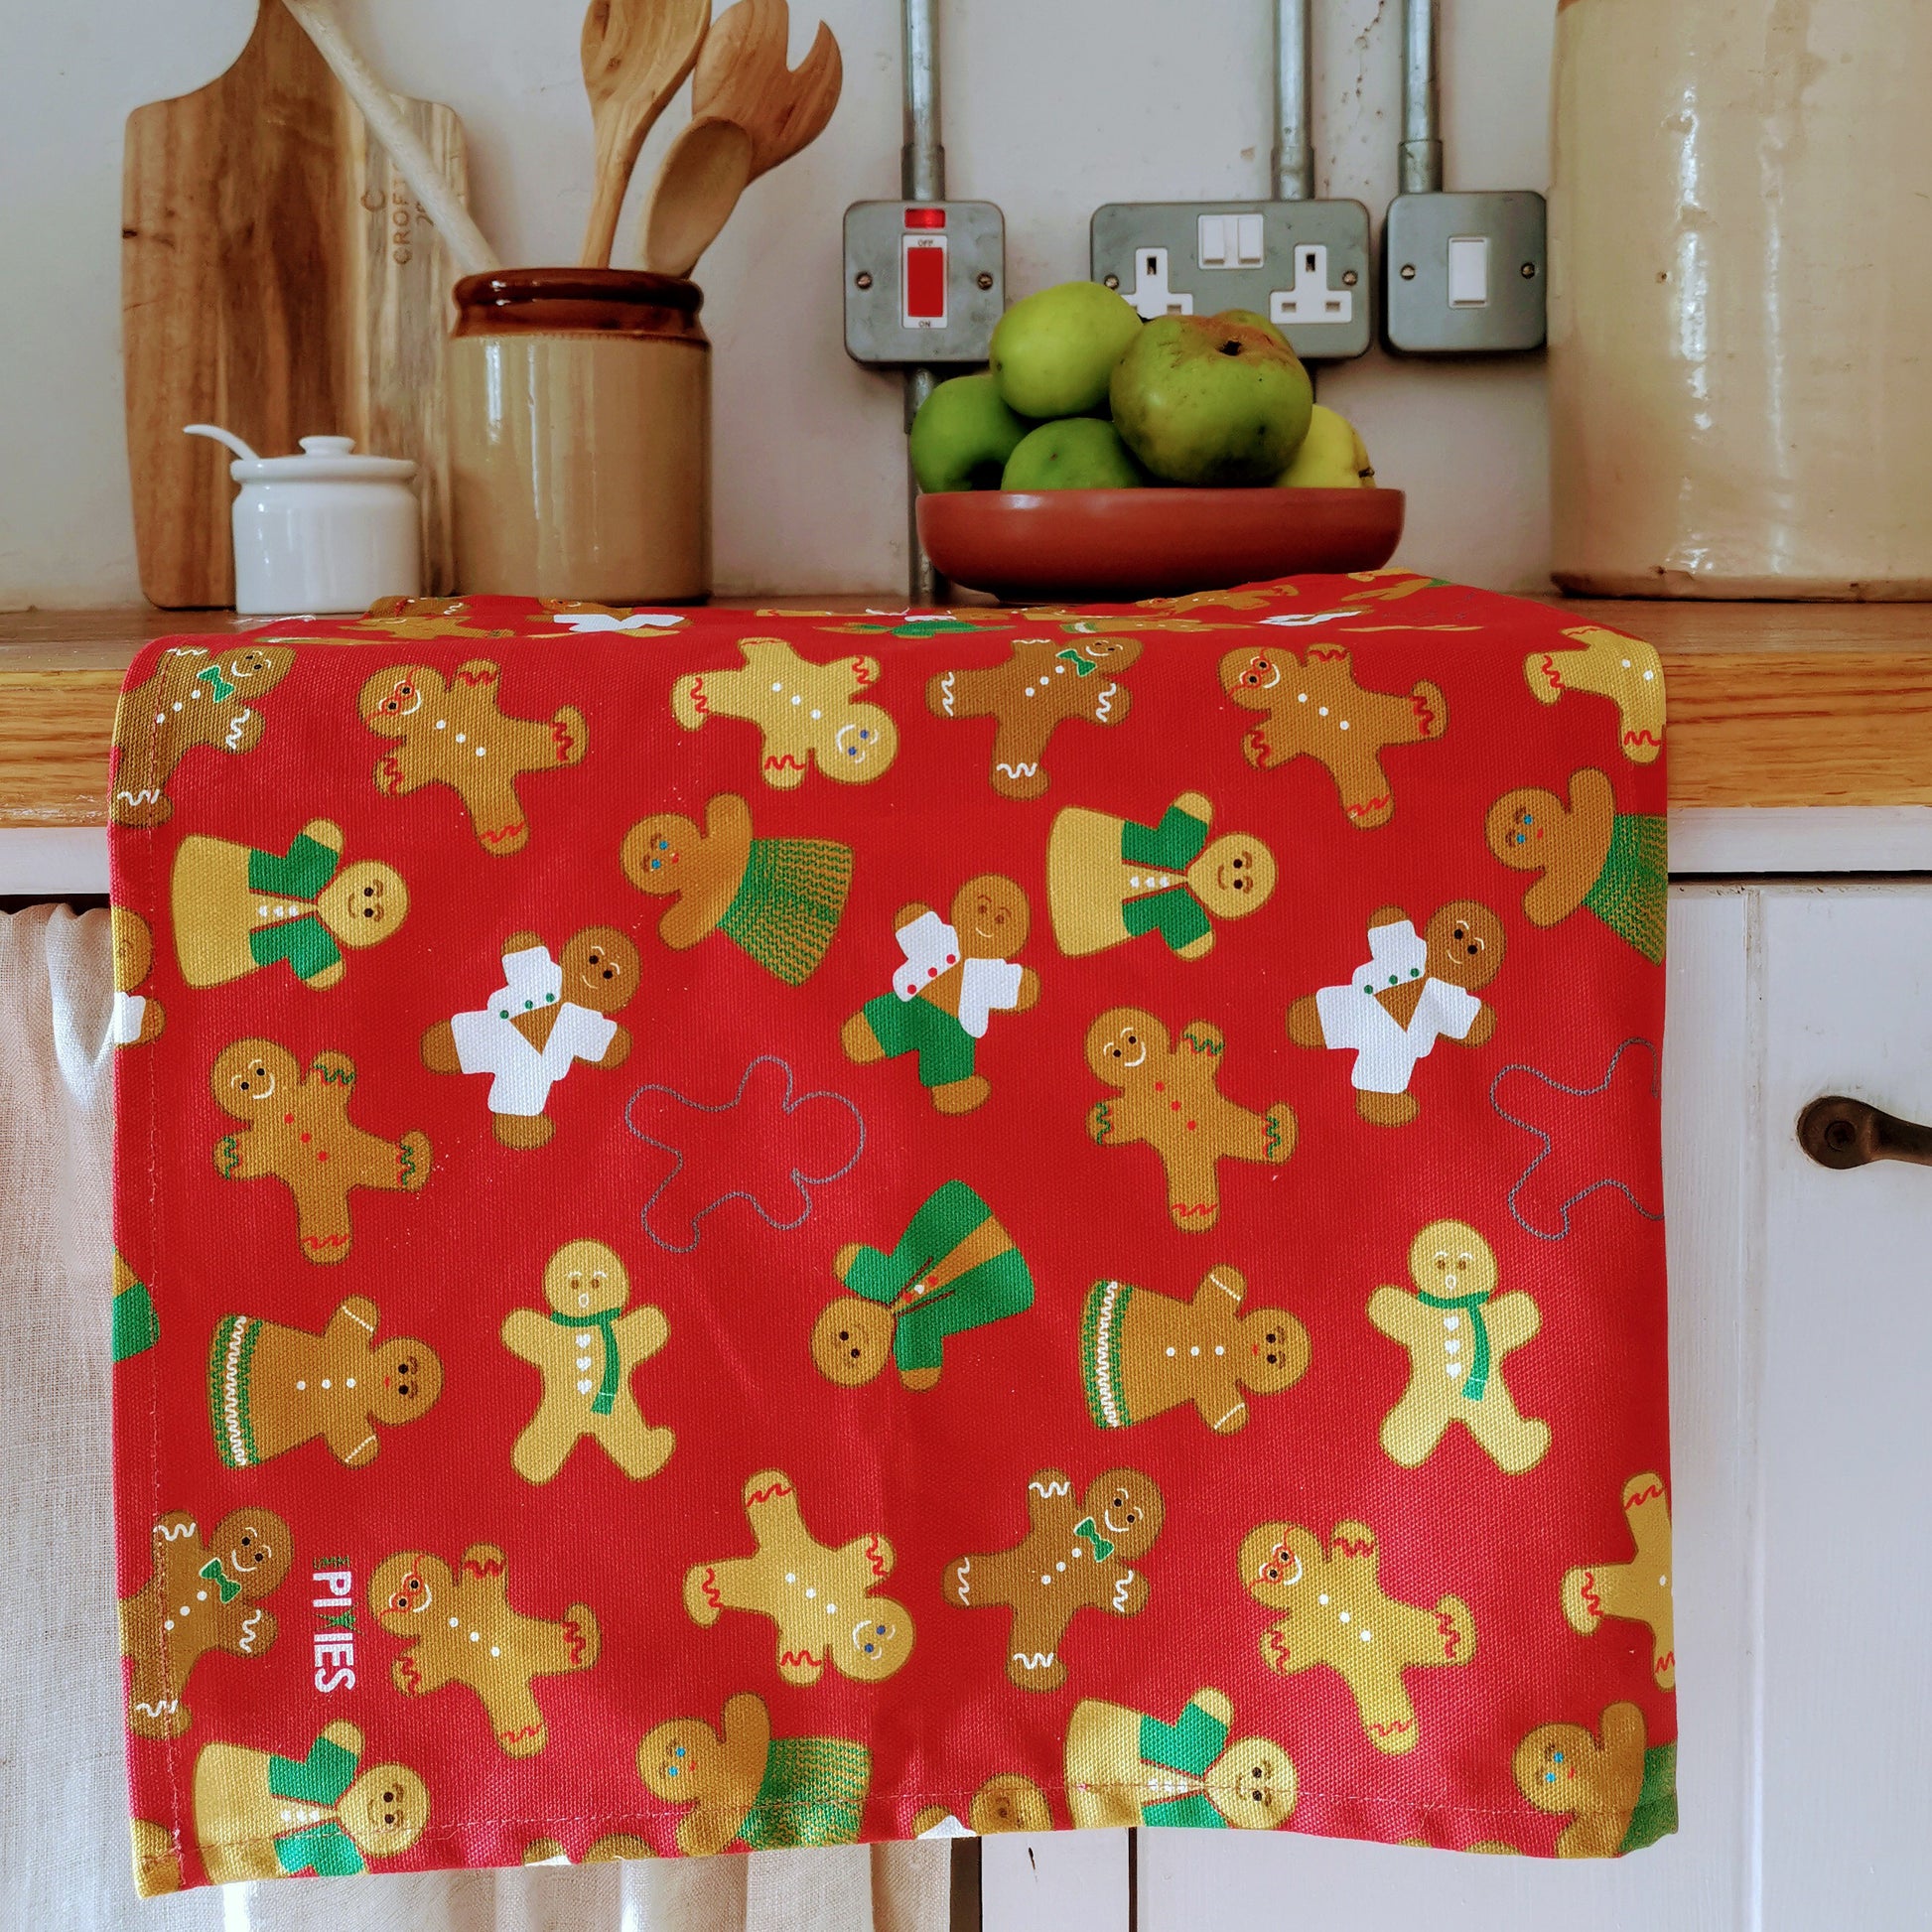 Gingerbread Folk Tea Towel in organic Cotton from UmmPixies. Designed and made in the UK